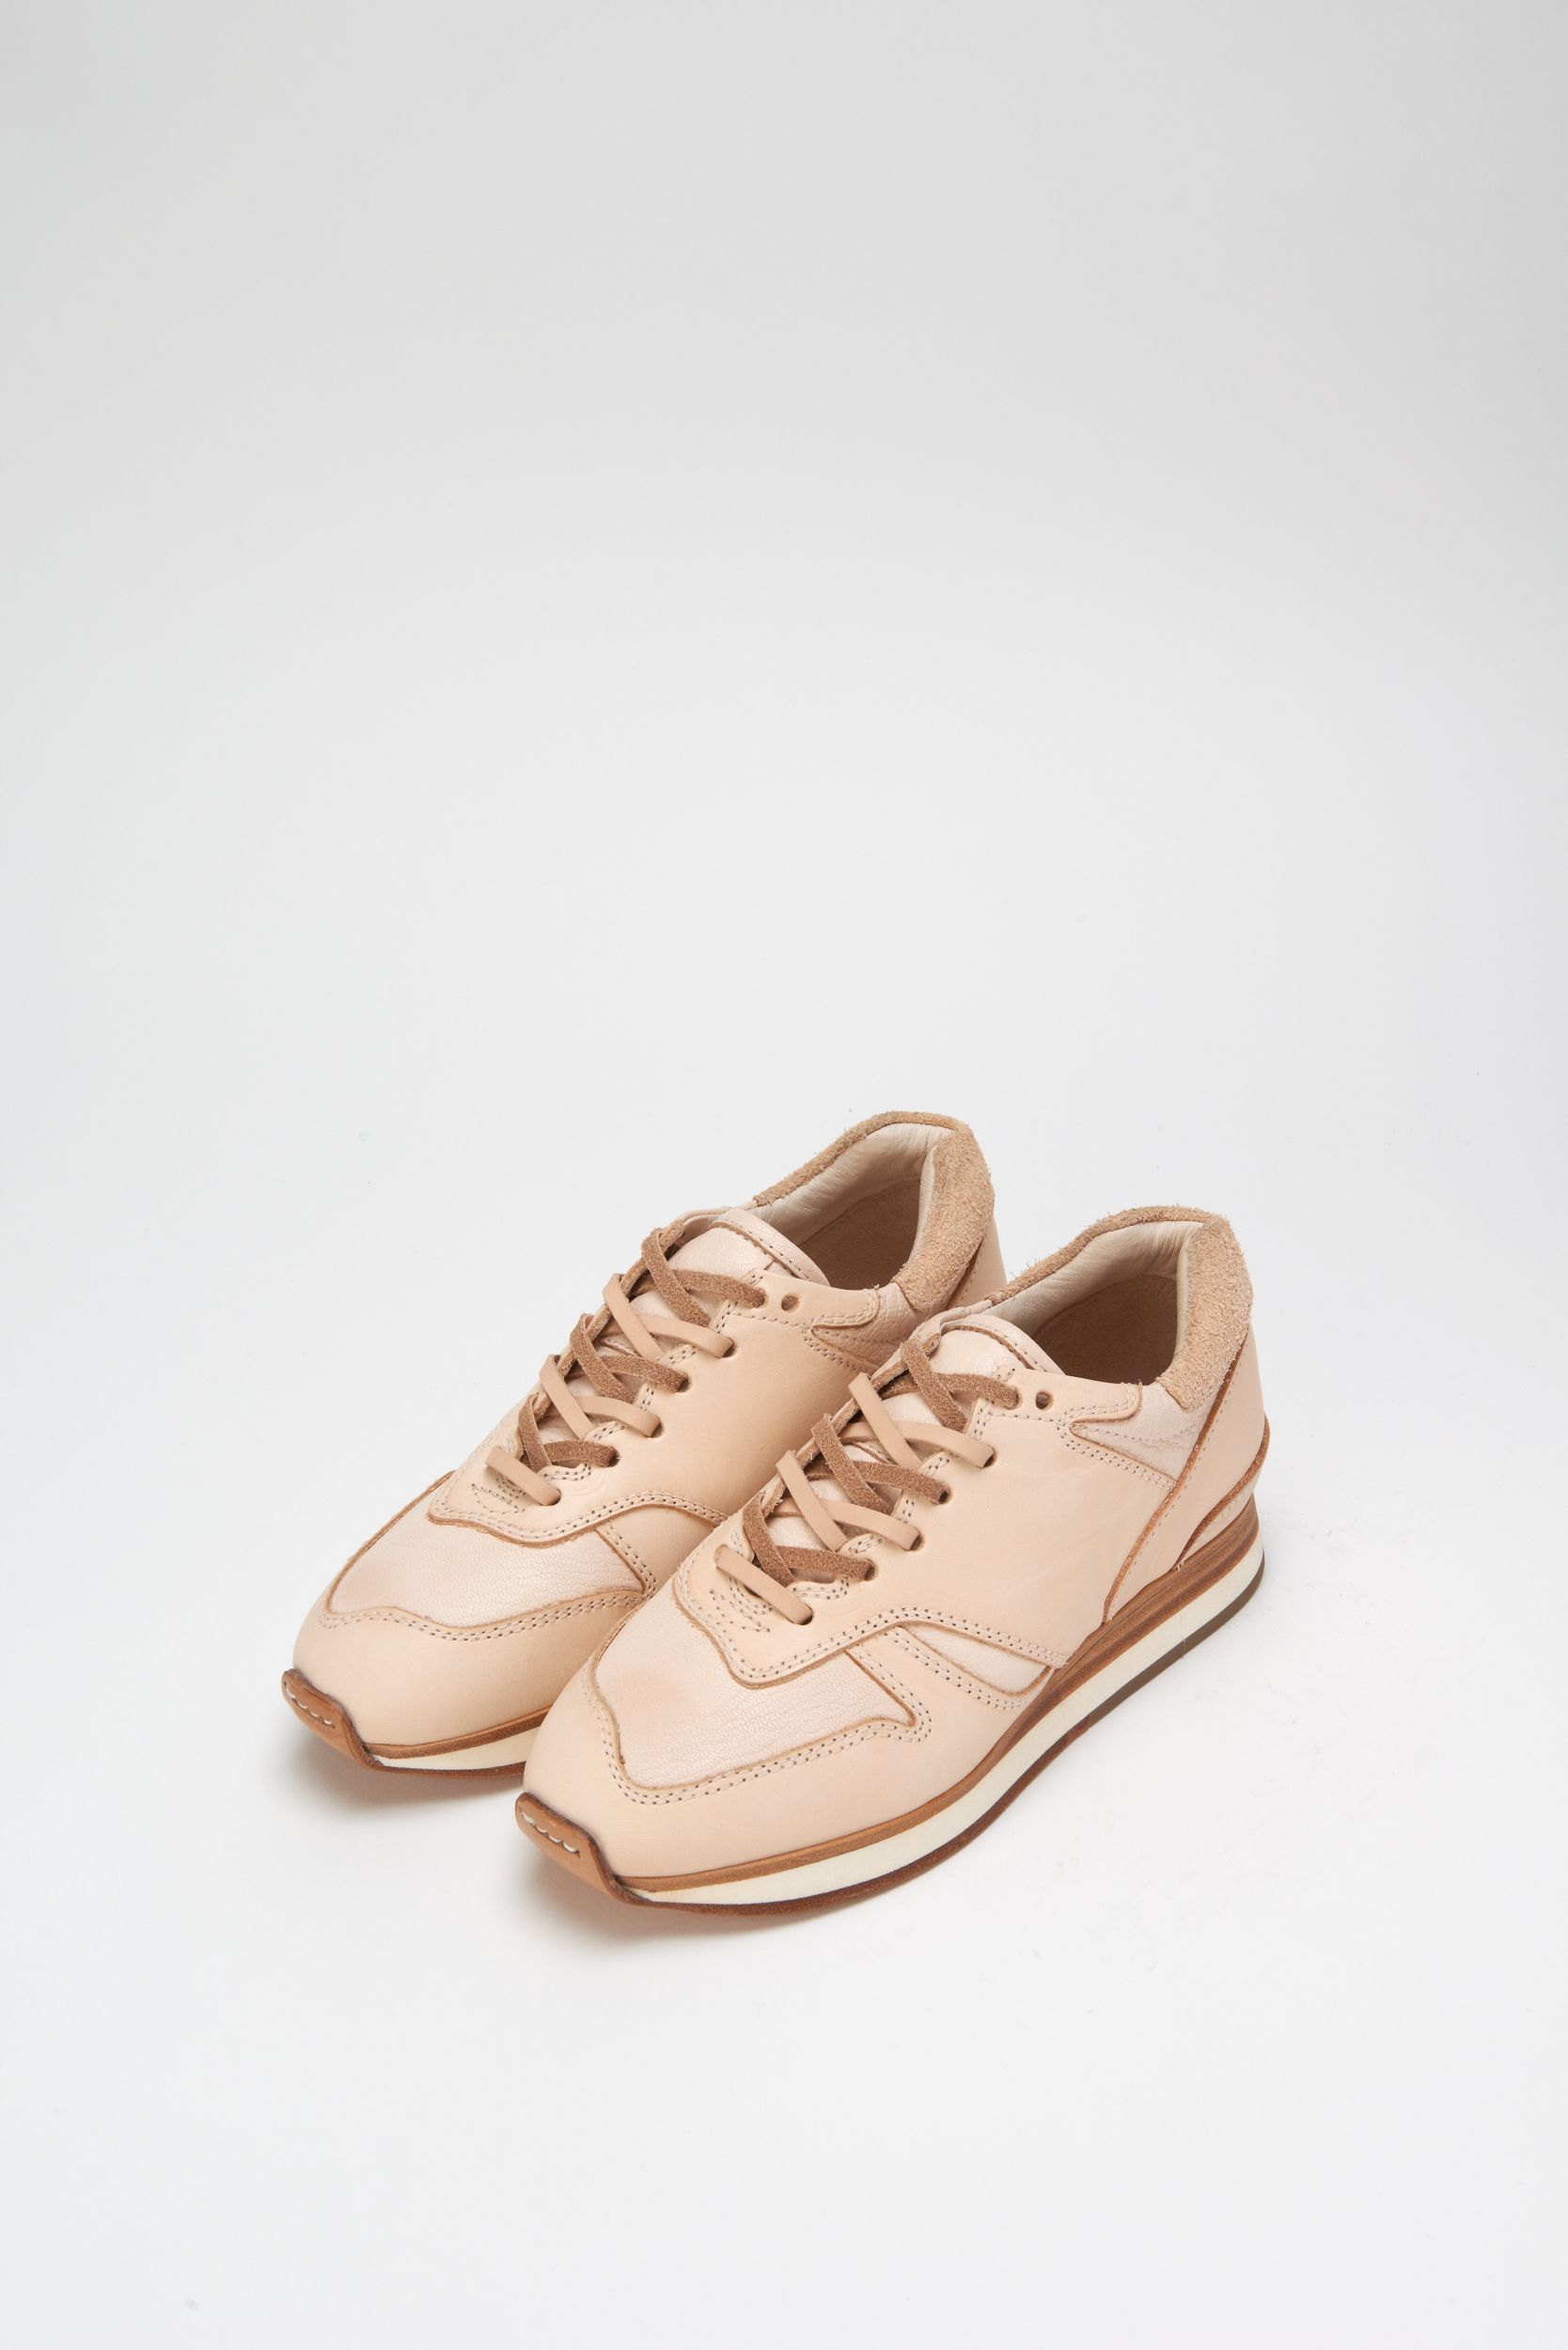 hender scheme (エンダースキーマ) manual industrial product 08 ...